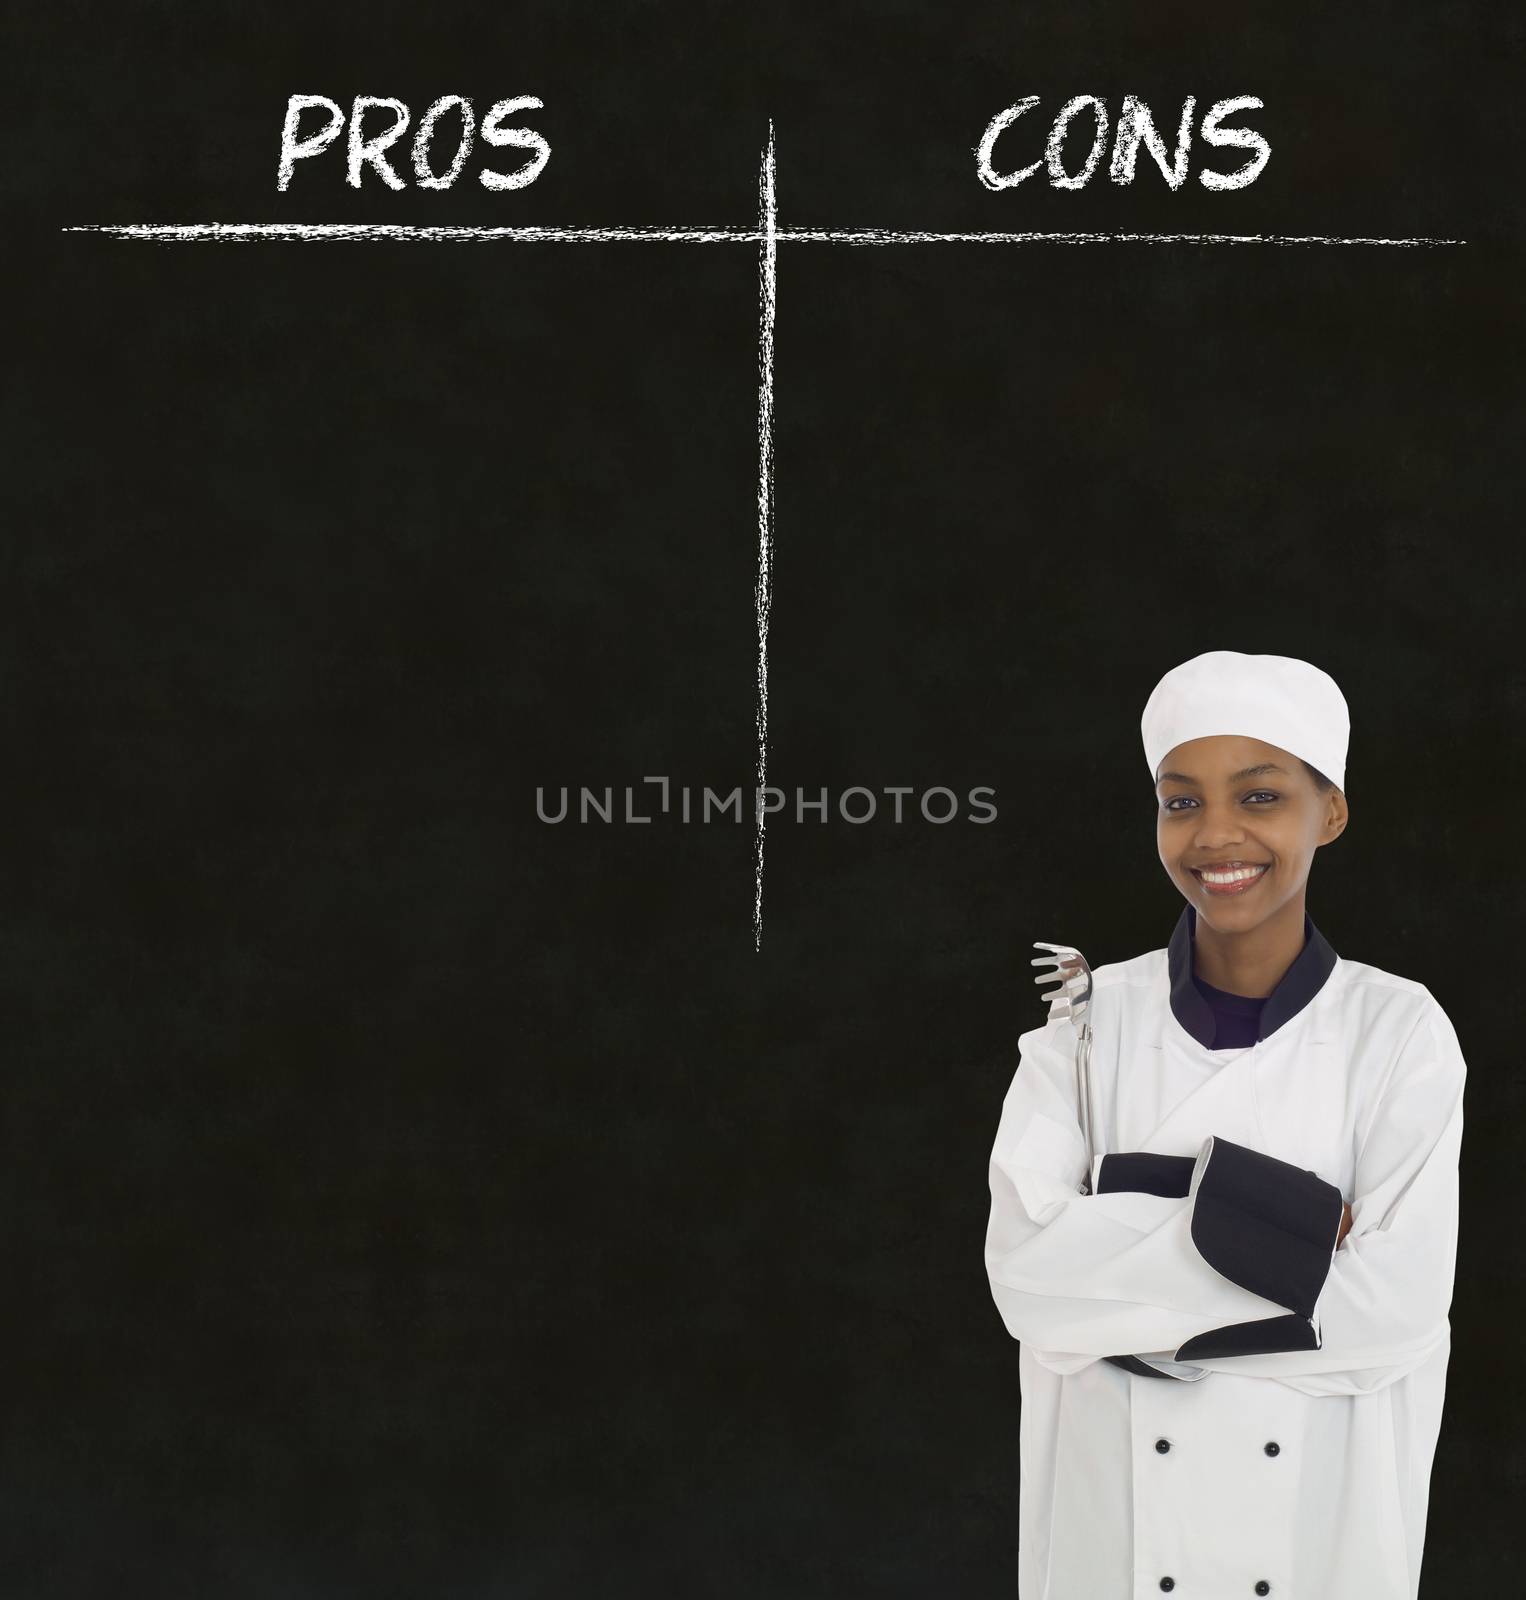 African American woman chef holding utensil with chalk pros and cons on blackboard background